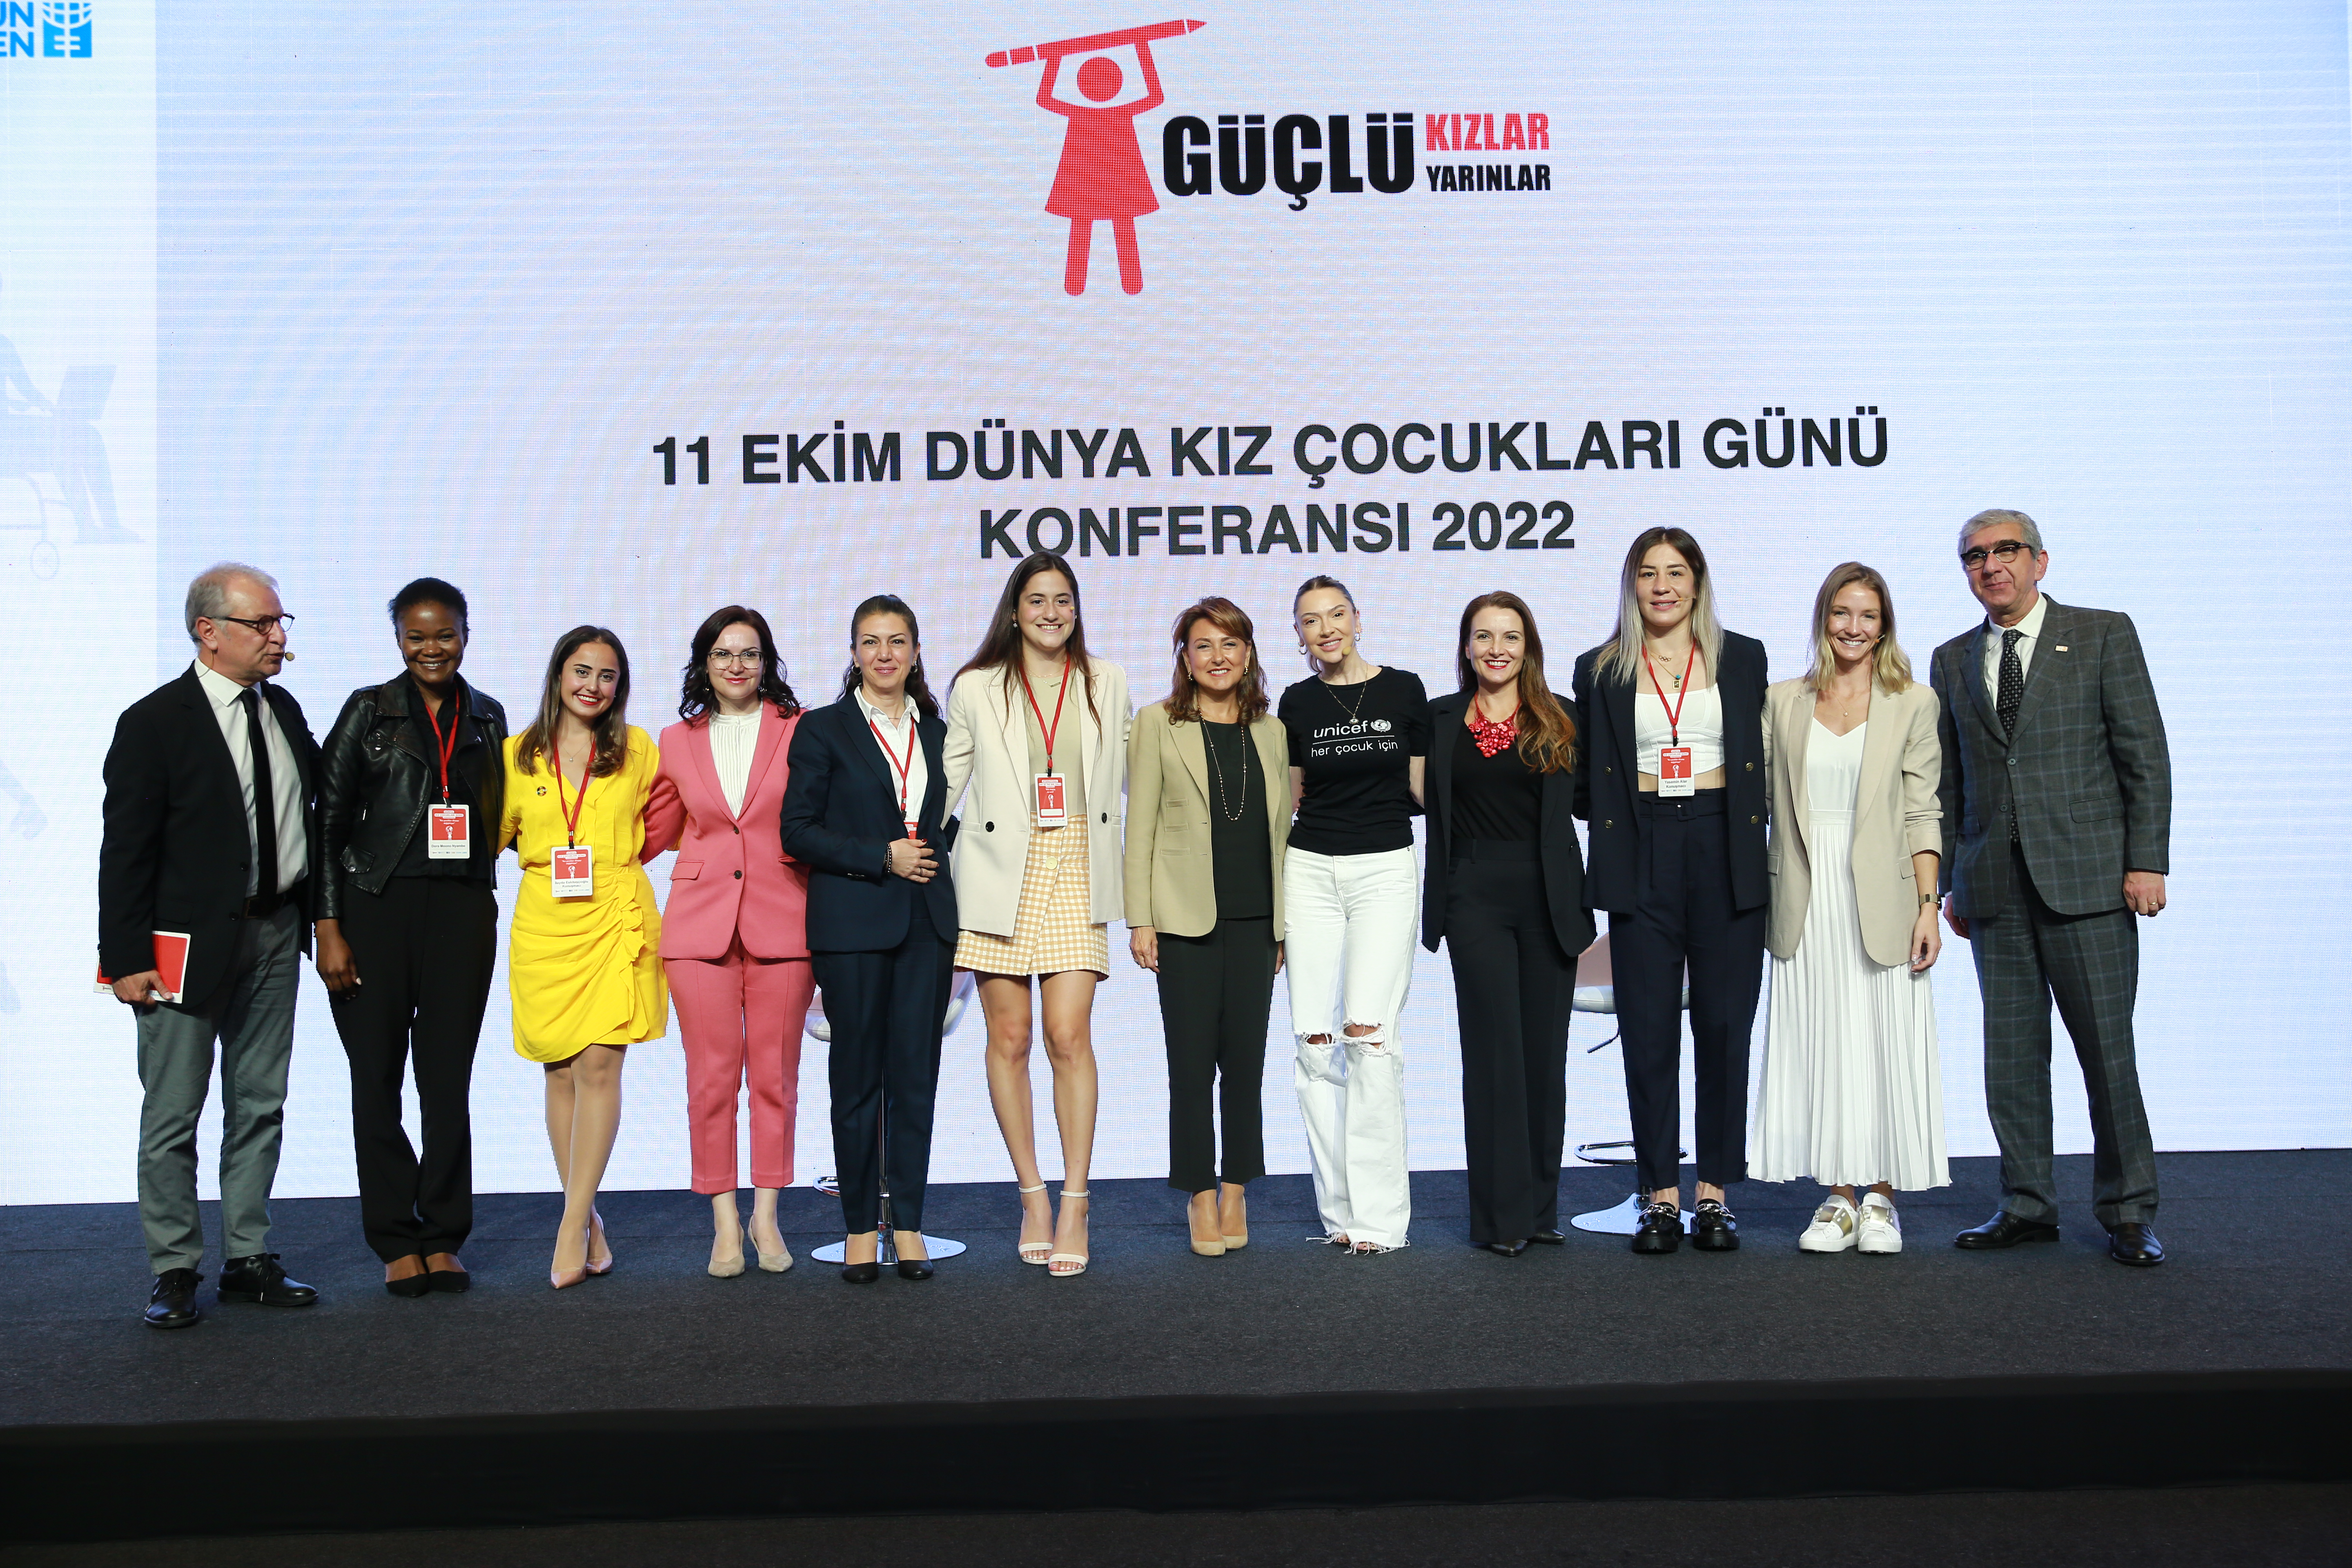 Representatives from UN Women, UNICEF, UNFPA and Aydın Doğan Foundation, together with speakers on the main stage of the International Day of the Girl Child Conference in Türkiye. Photo: Courtesy of Aydın Doğan Foundation.